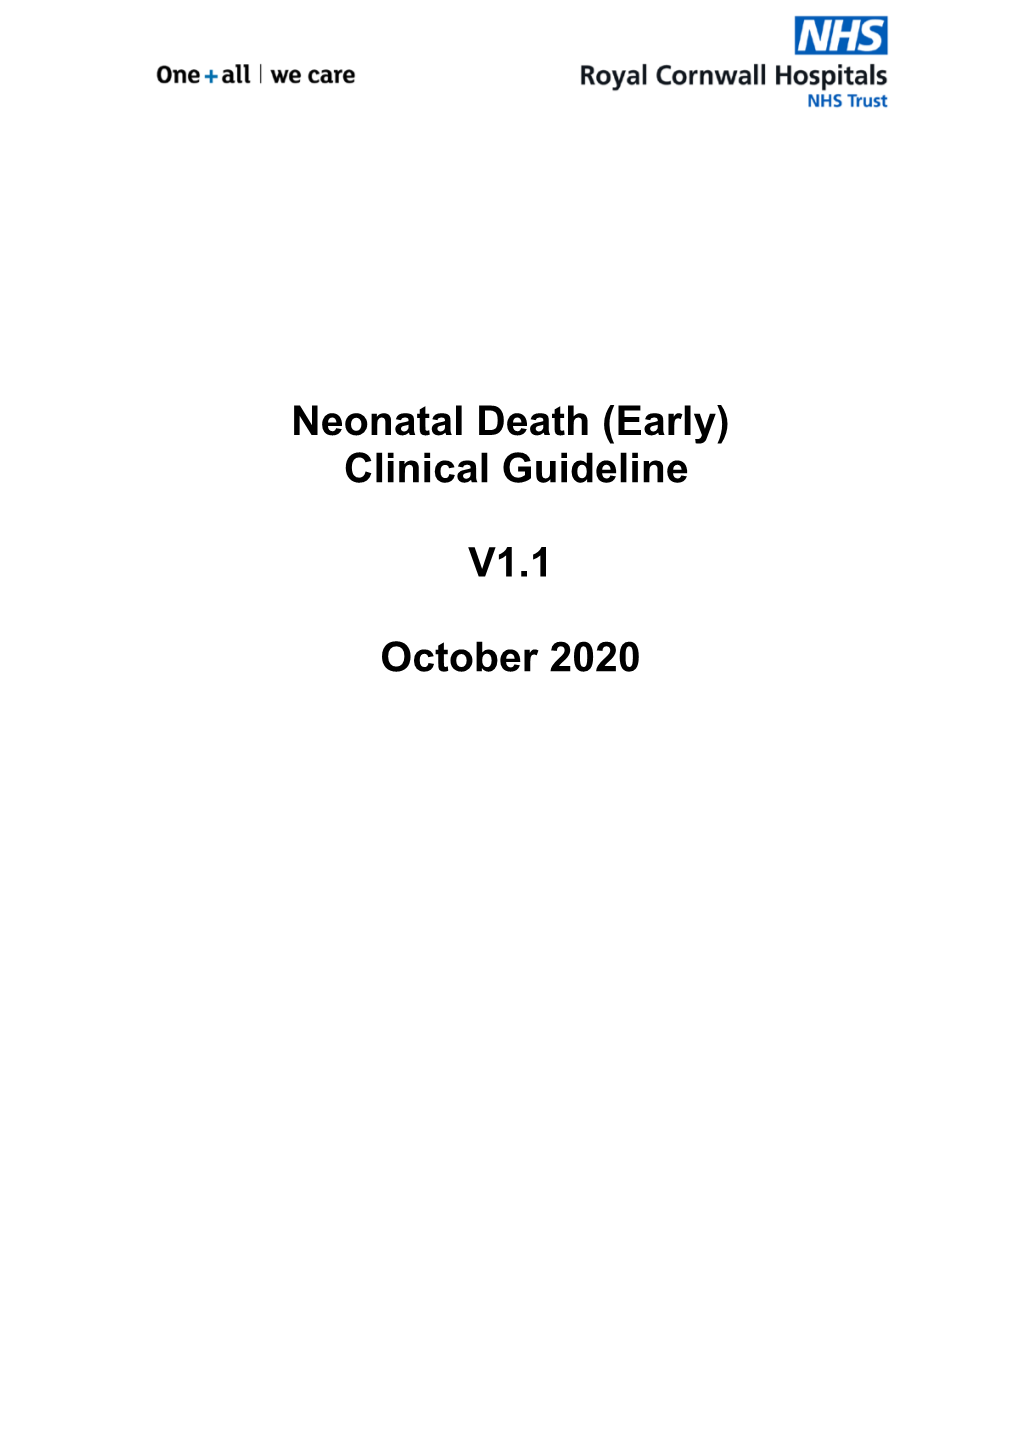 Neonatal Death (Early) Clinical Guideline V1.1 October 2020